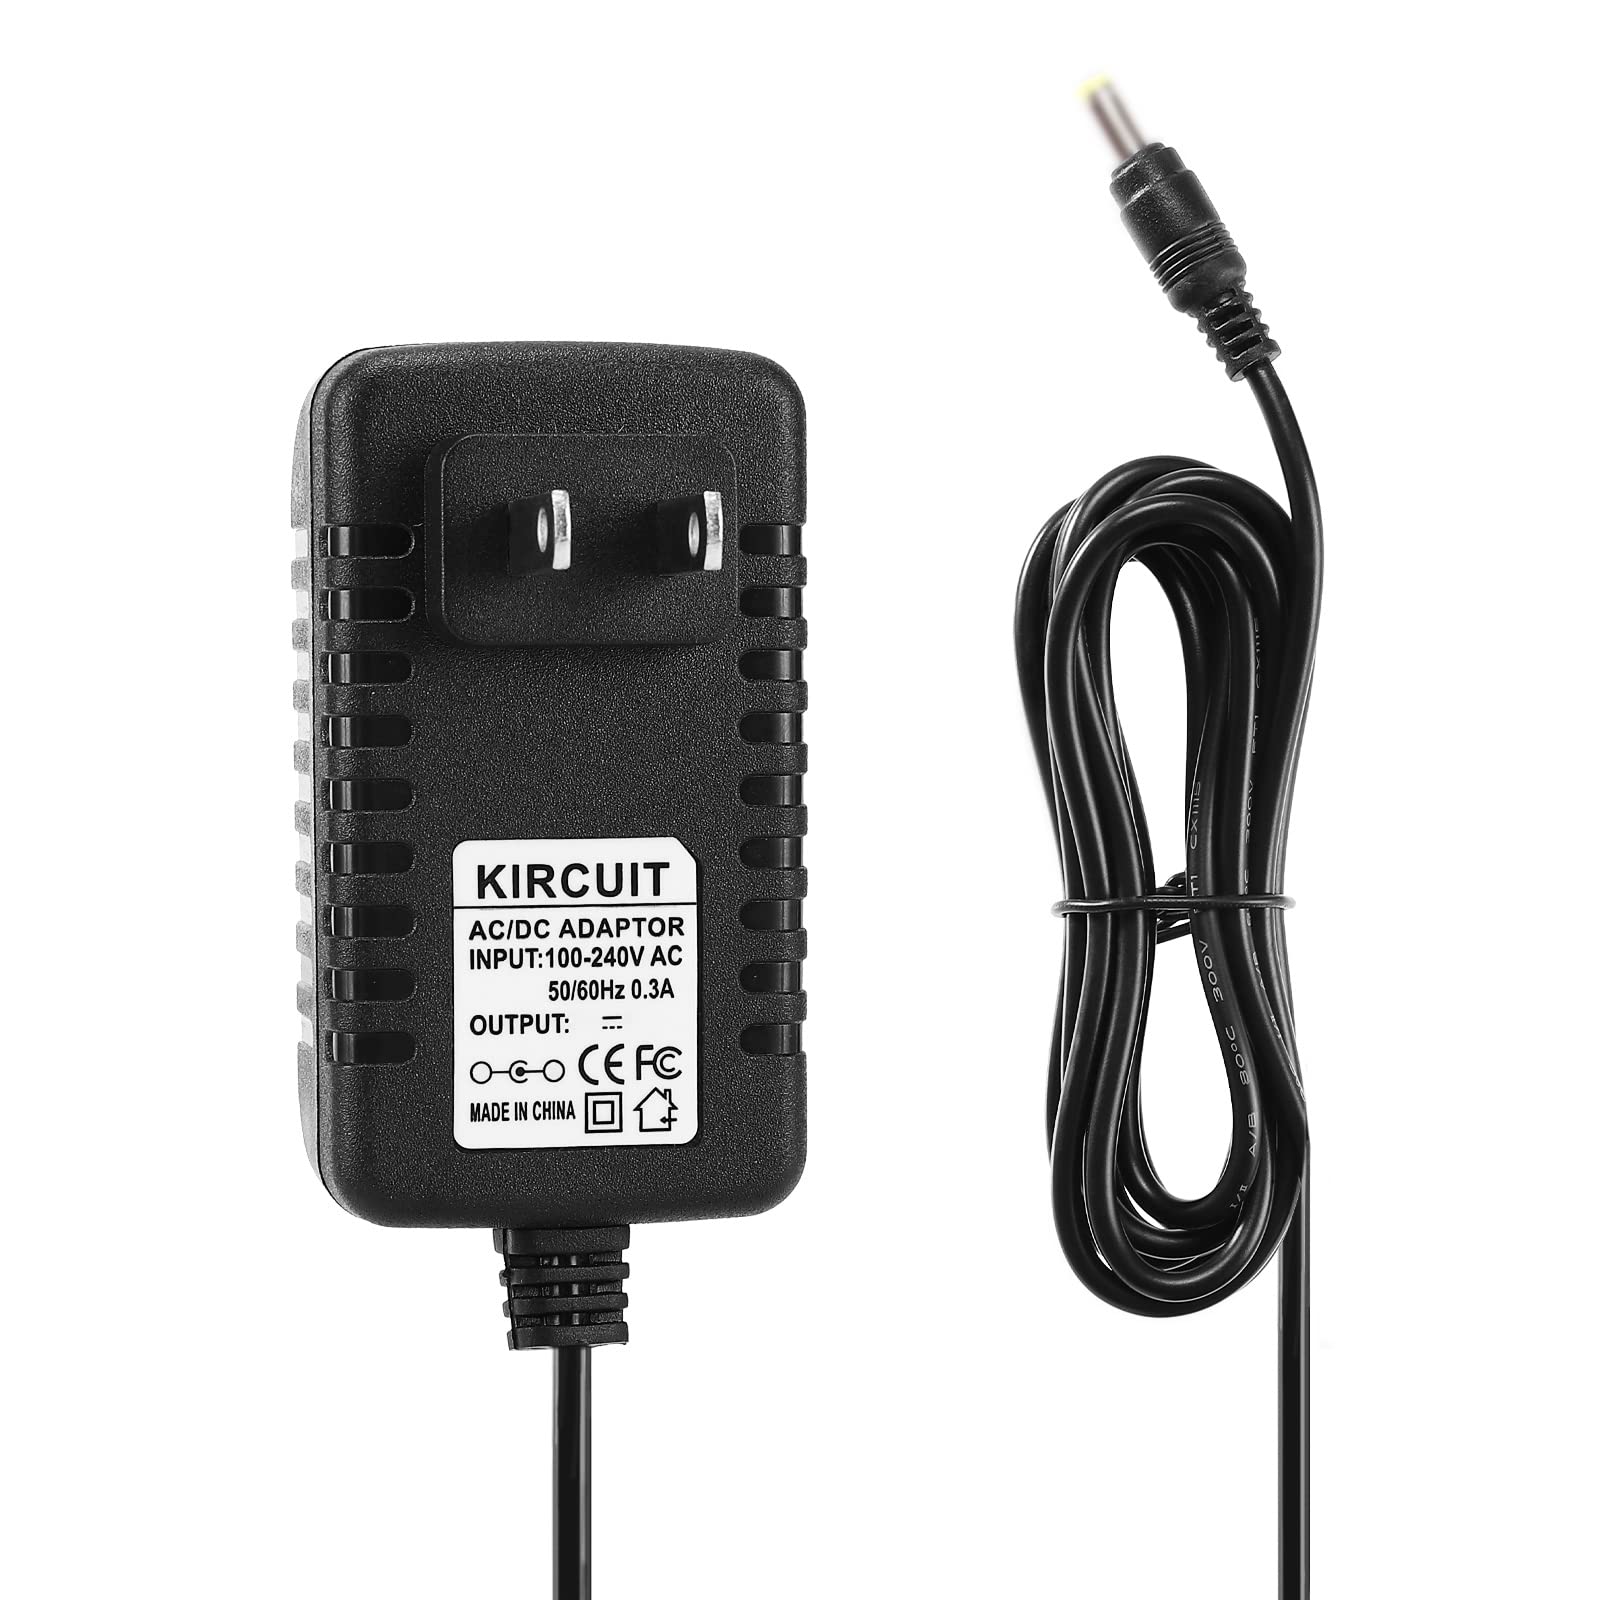 Kircuit 12.6V 1A 2-Prong AC/DC Adapter Compatible with Aiper P1111 AI-P1111-AMUS-A Cordless Handheld Rechargeable Pool Vacuum Cleaner 11.1V 2000mAh Lithium Battery 12.6VDC 1000mA Power Supply Charger